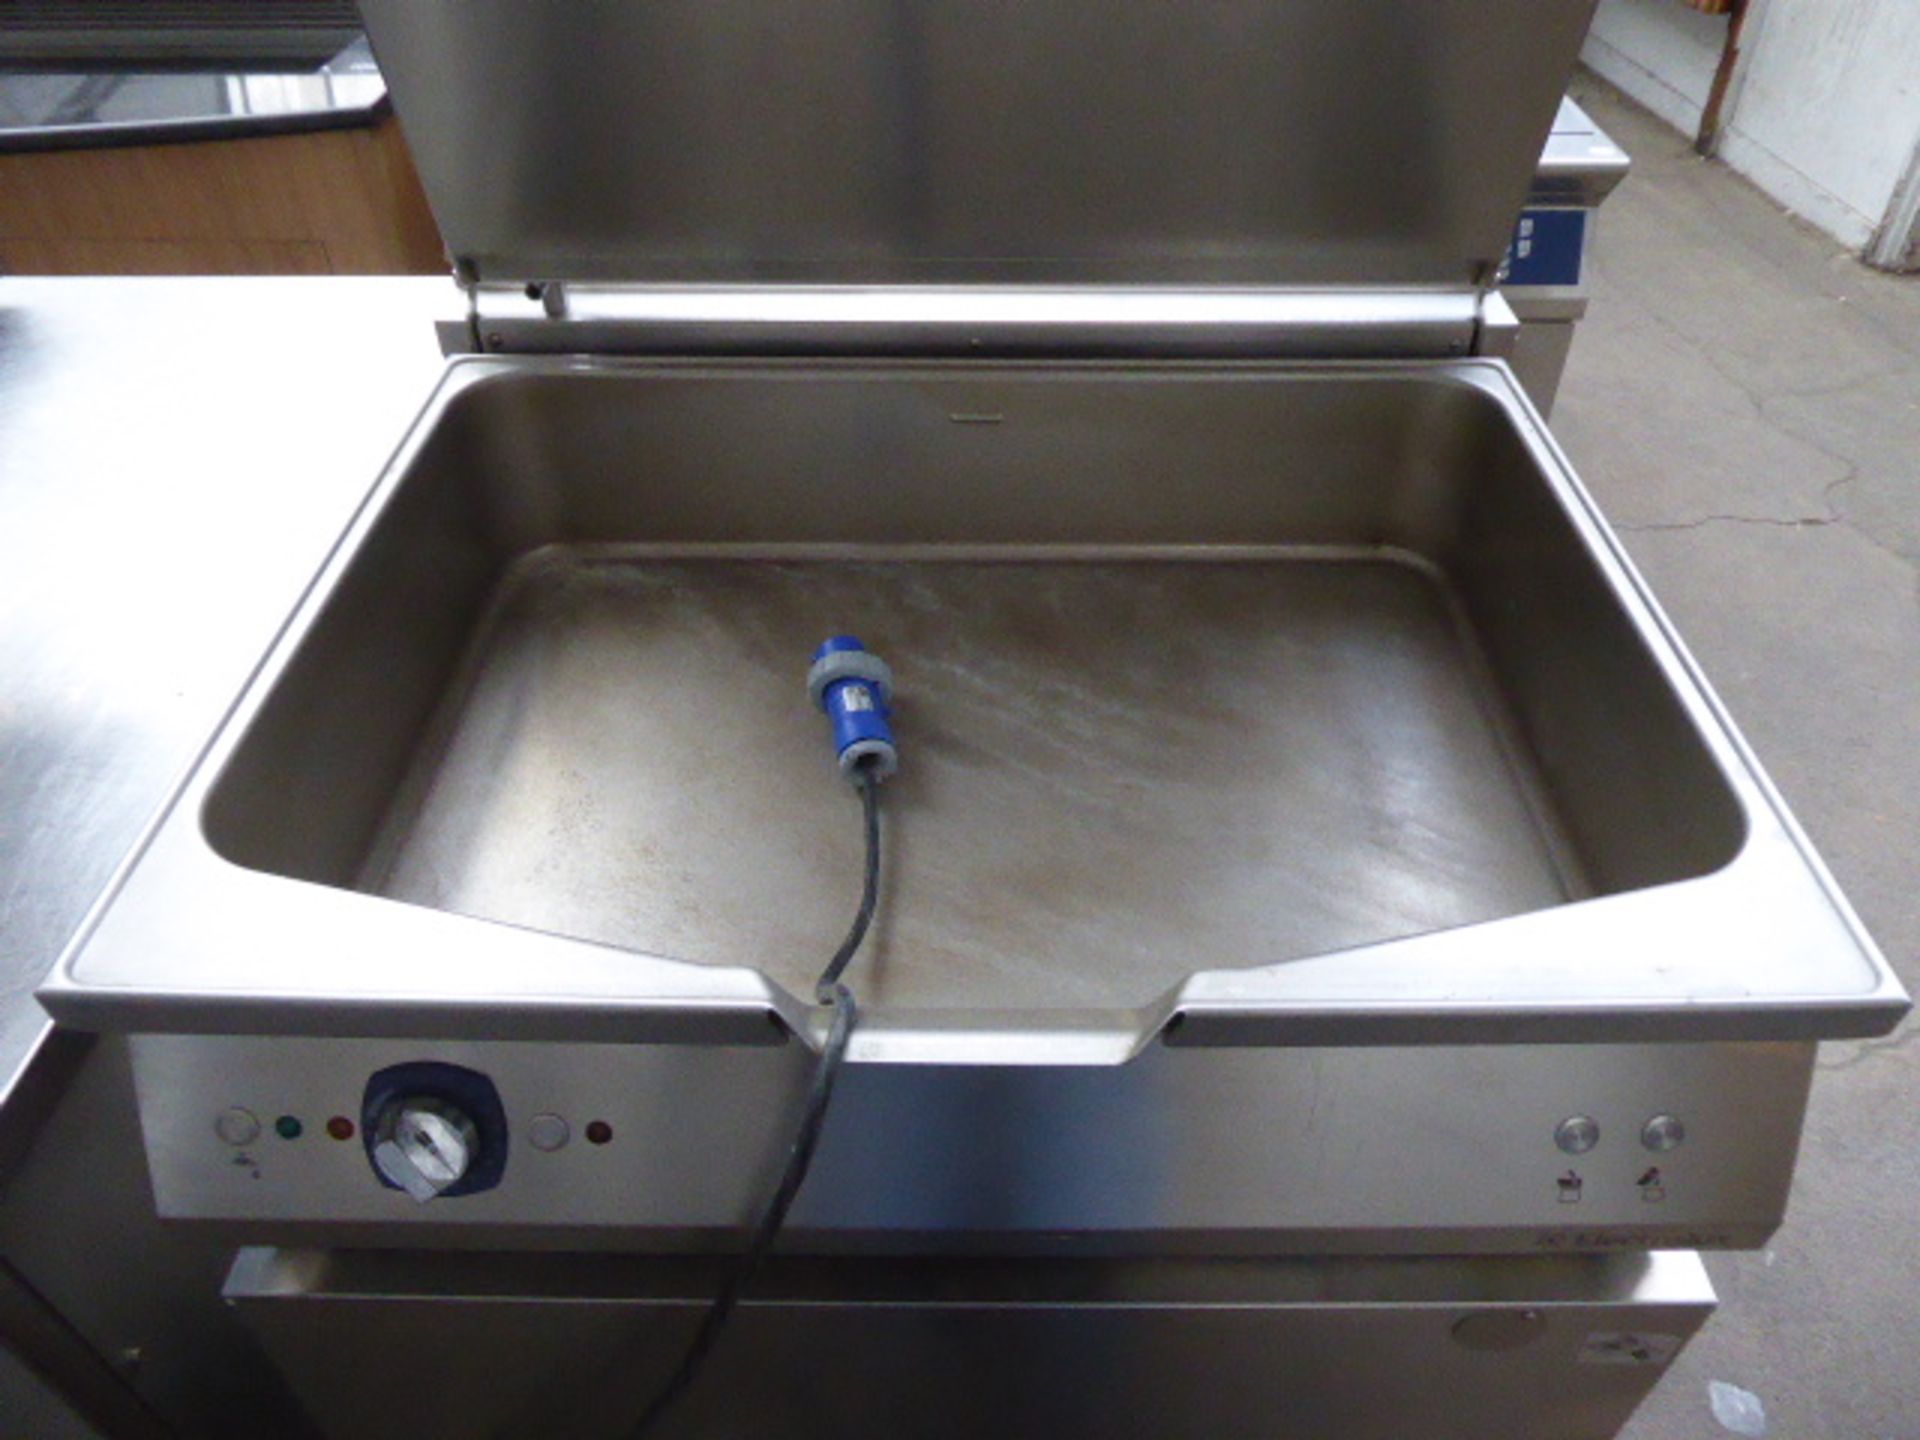 100cm gas Electrolux bratt pan with electronic tilt on associated tabling - Image 2 of 2